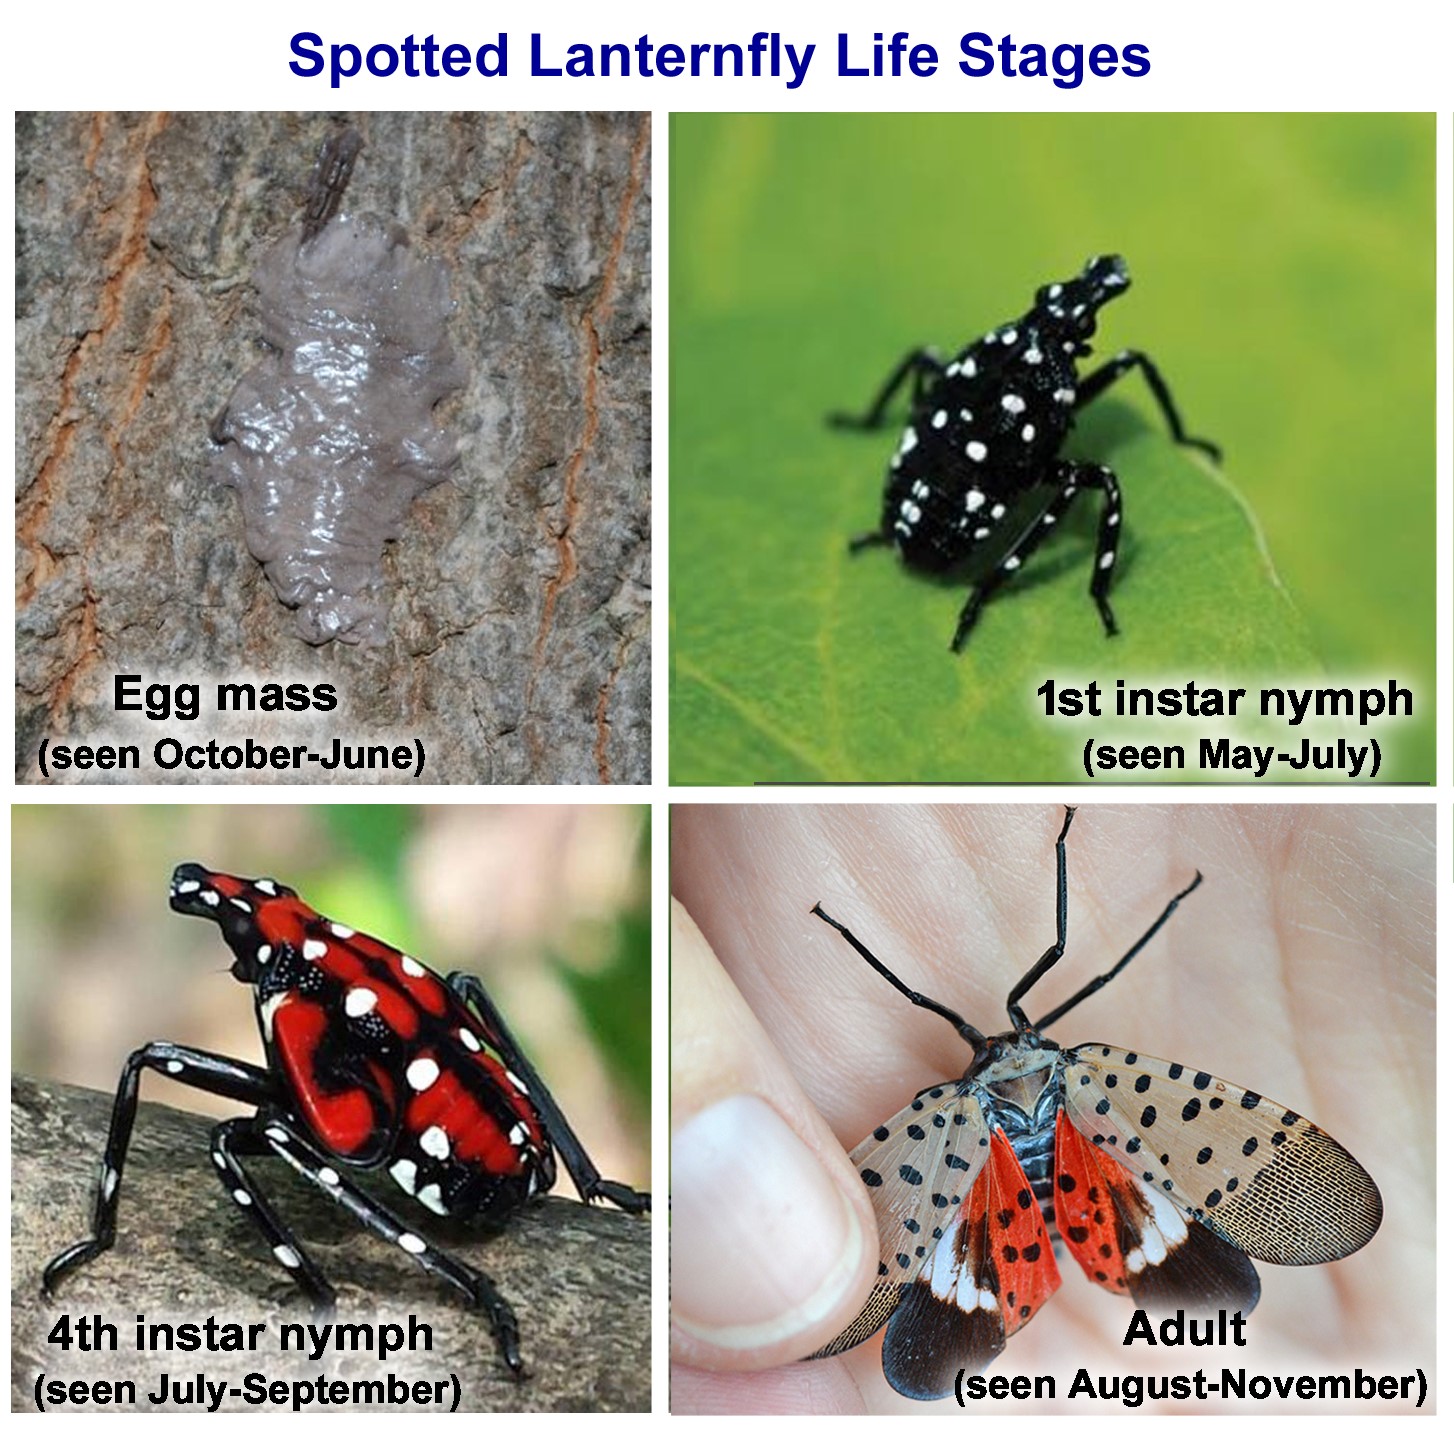 The stages of growth of a spotted lanternfly from egg to adult.